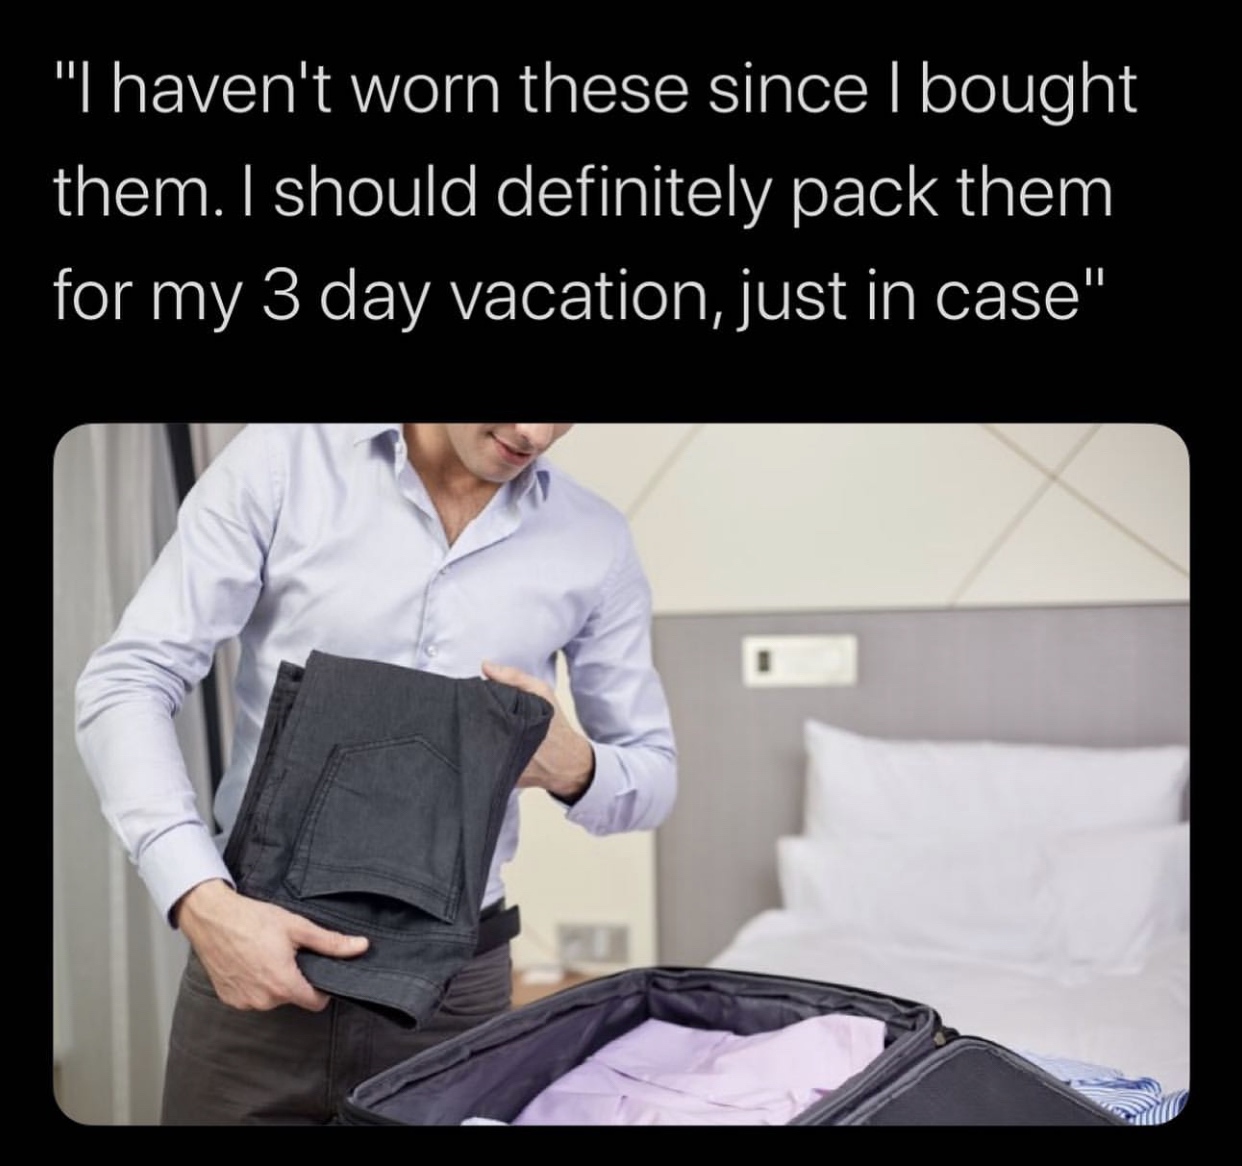 packing meme - "I haven't worn these since I bought them. I should definitely pack them for my 3 day vacation, just in case"